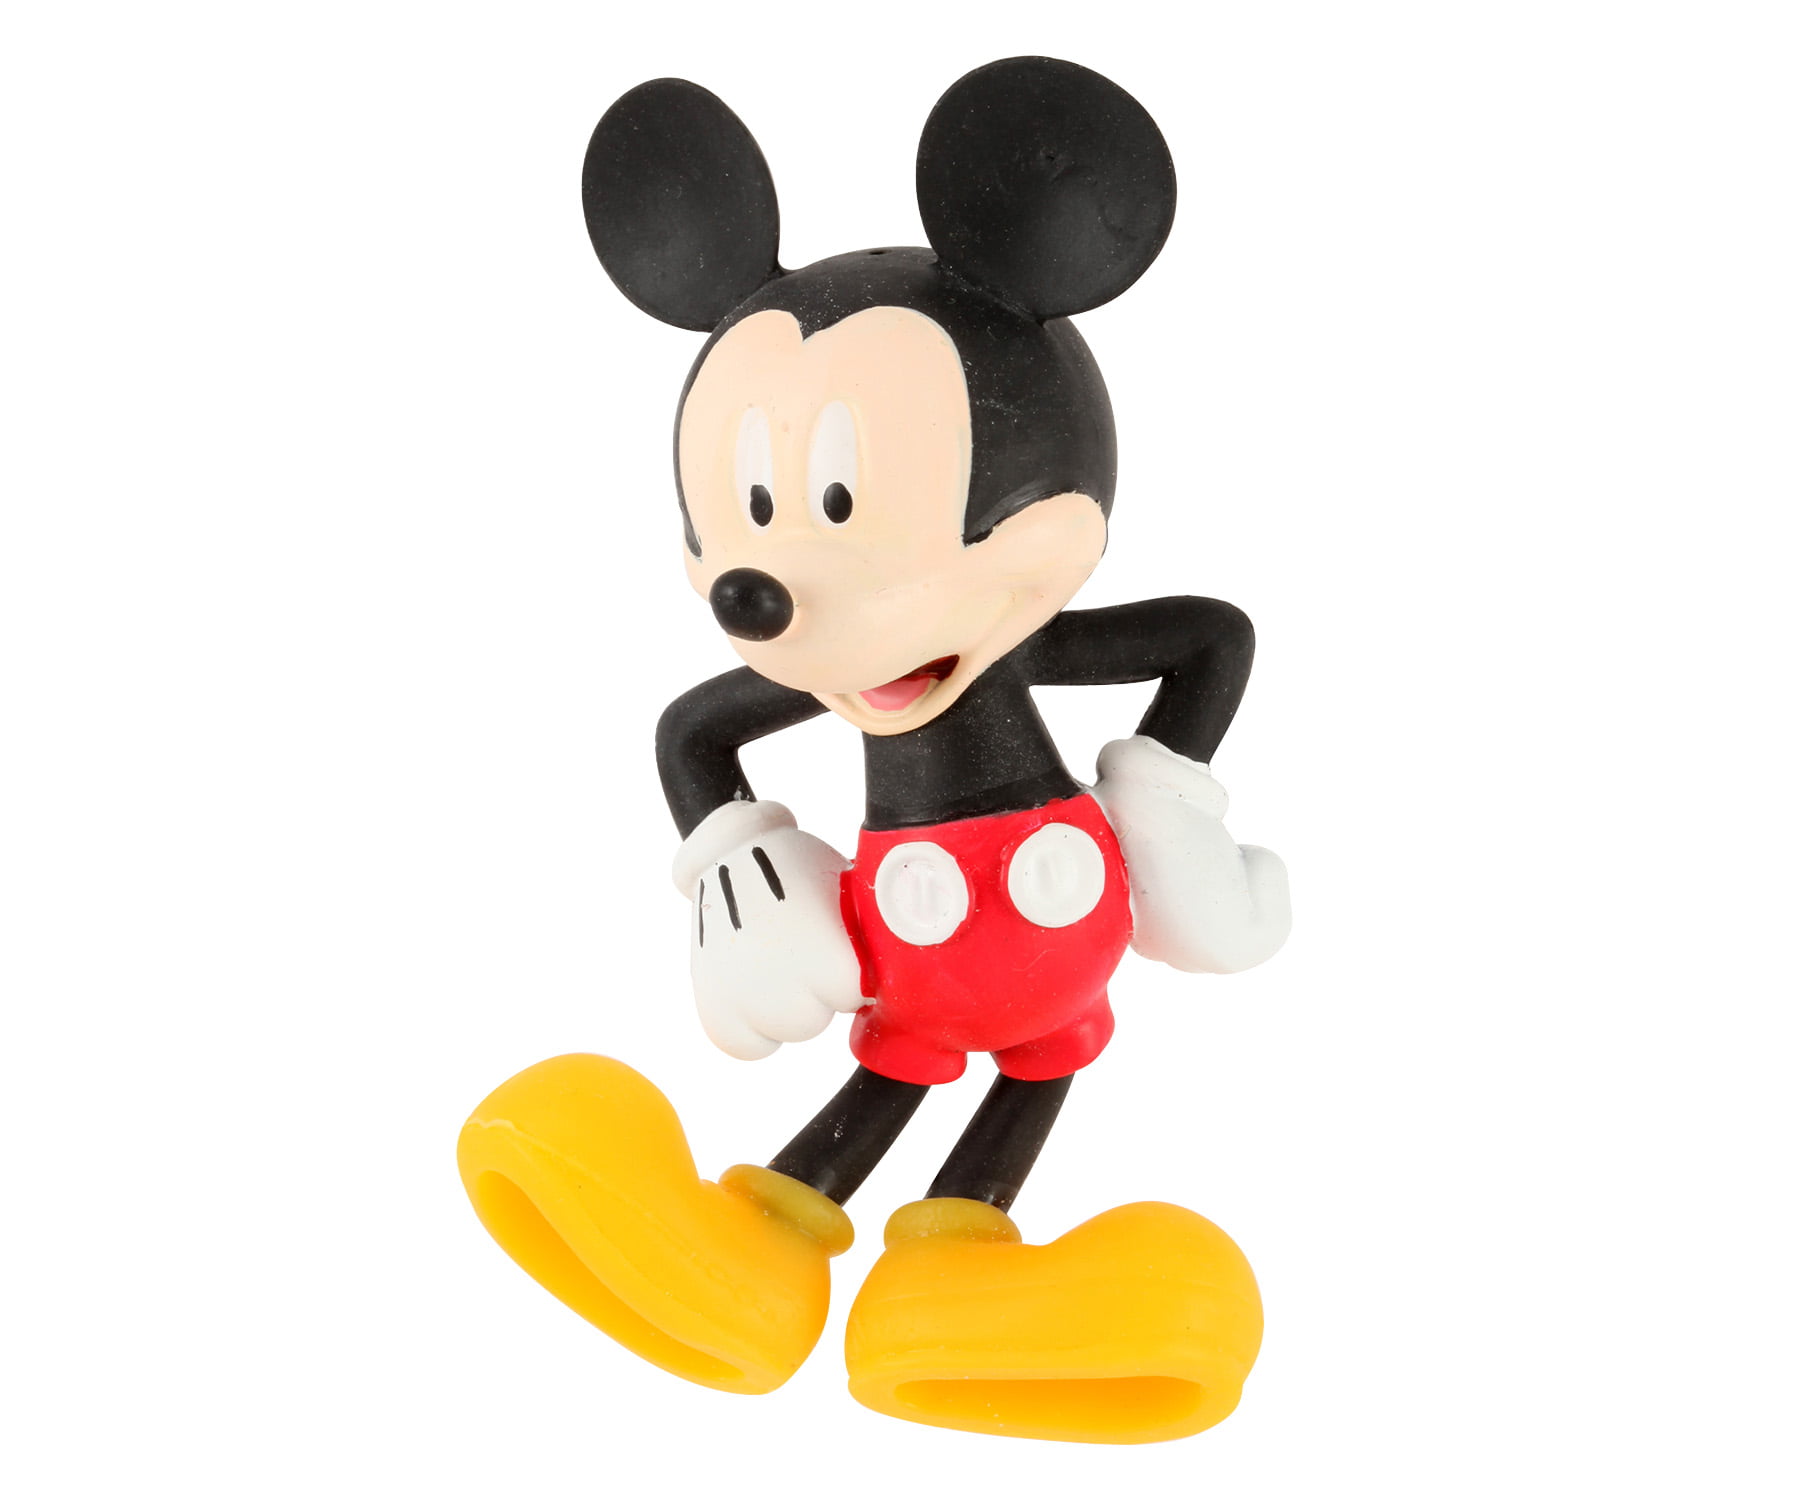 Imperial Micky mouse